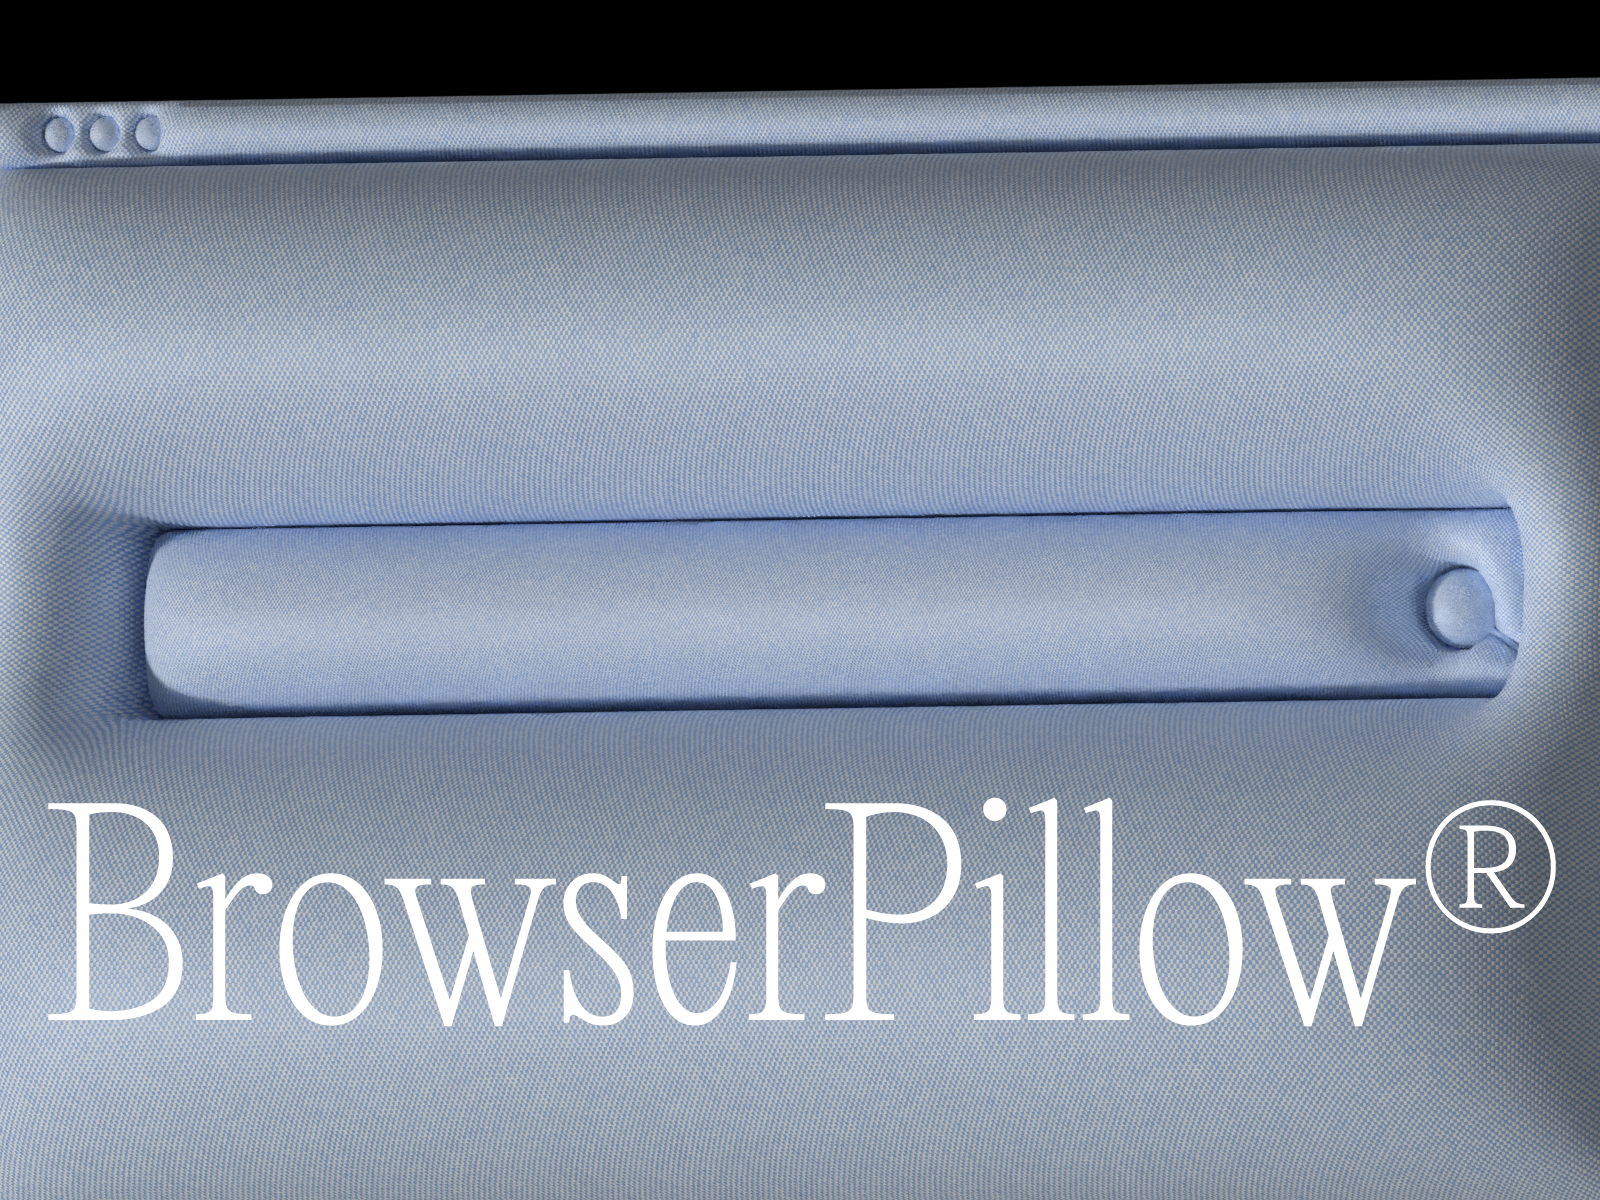 Browser Pillow Ad Concept